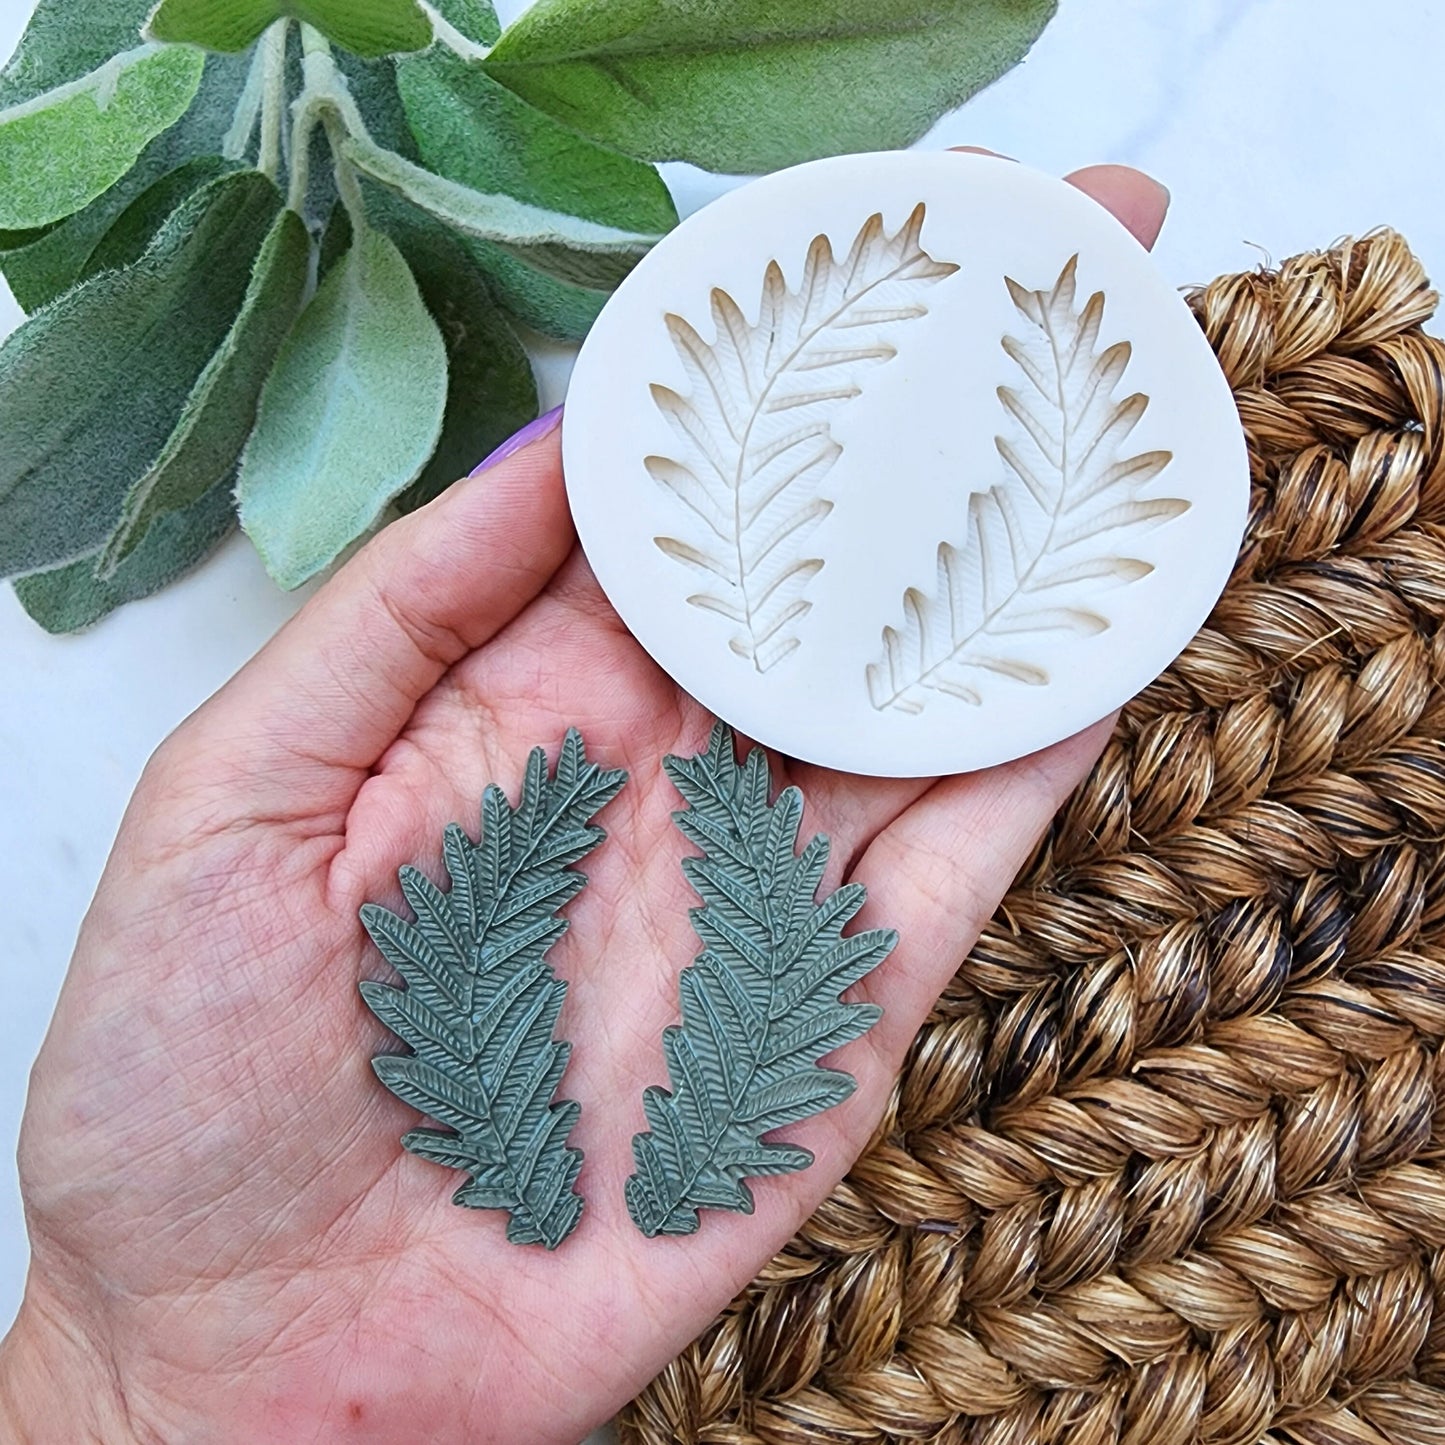 Polymer clay mold Silicone earrings mold "Fern leaf" Summer mold for resin and polymer clay Polymer clay tool Clay cutter Clay texture